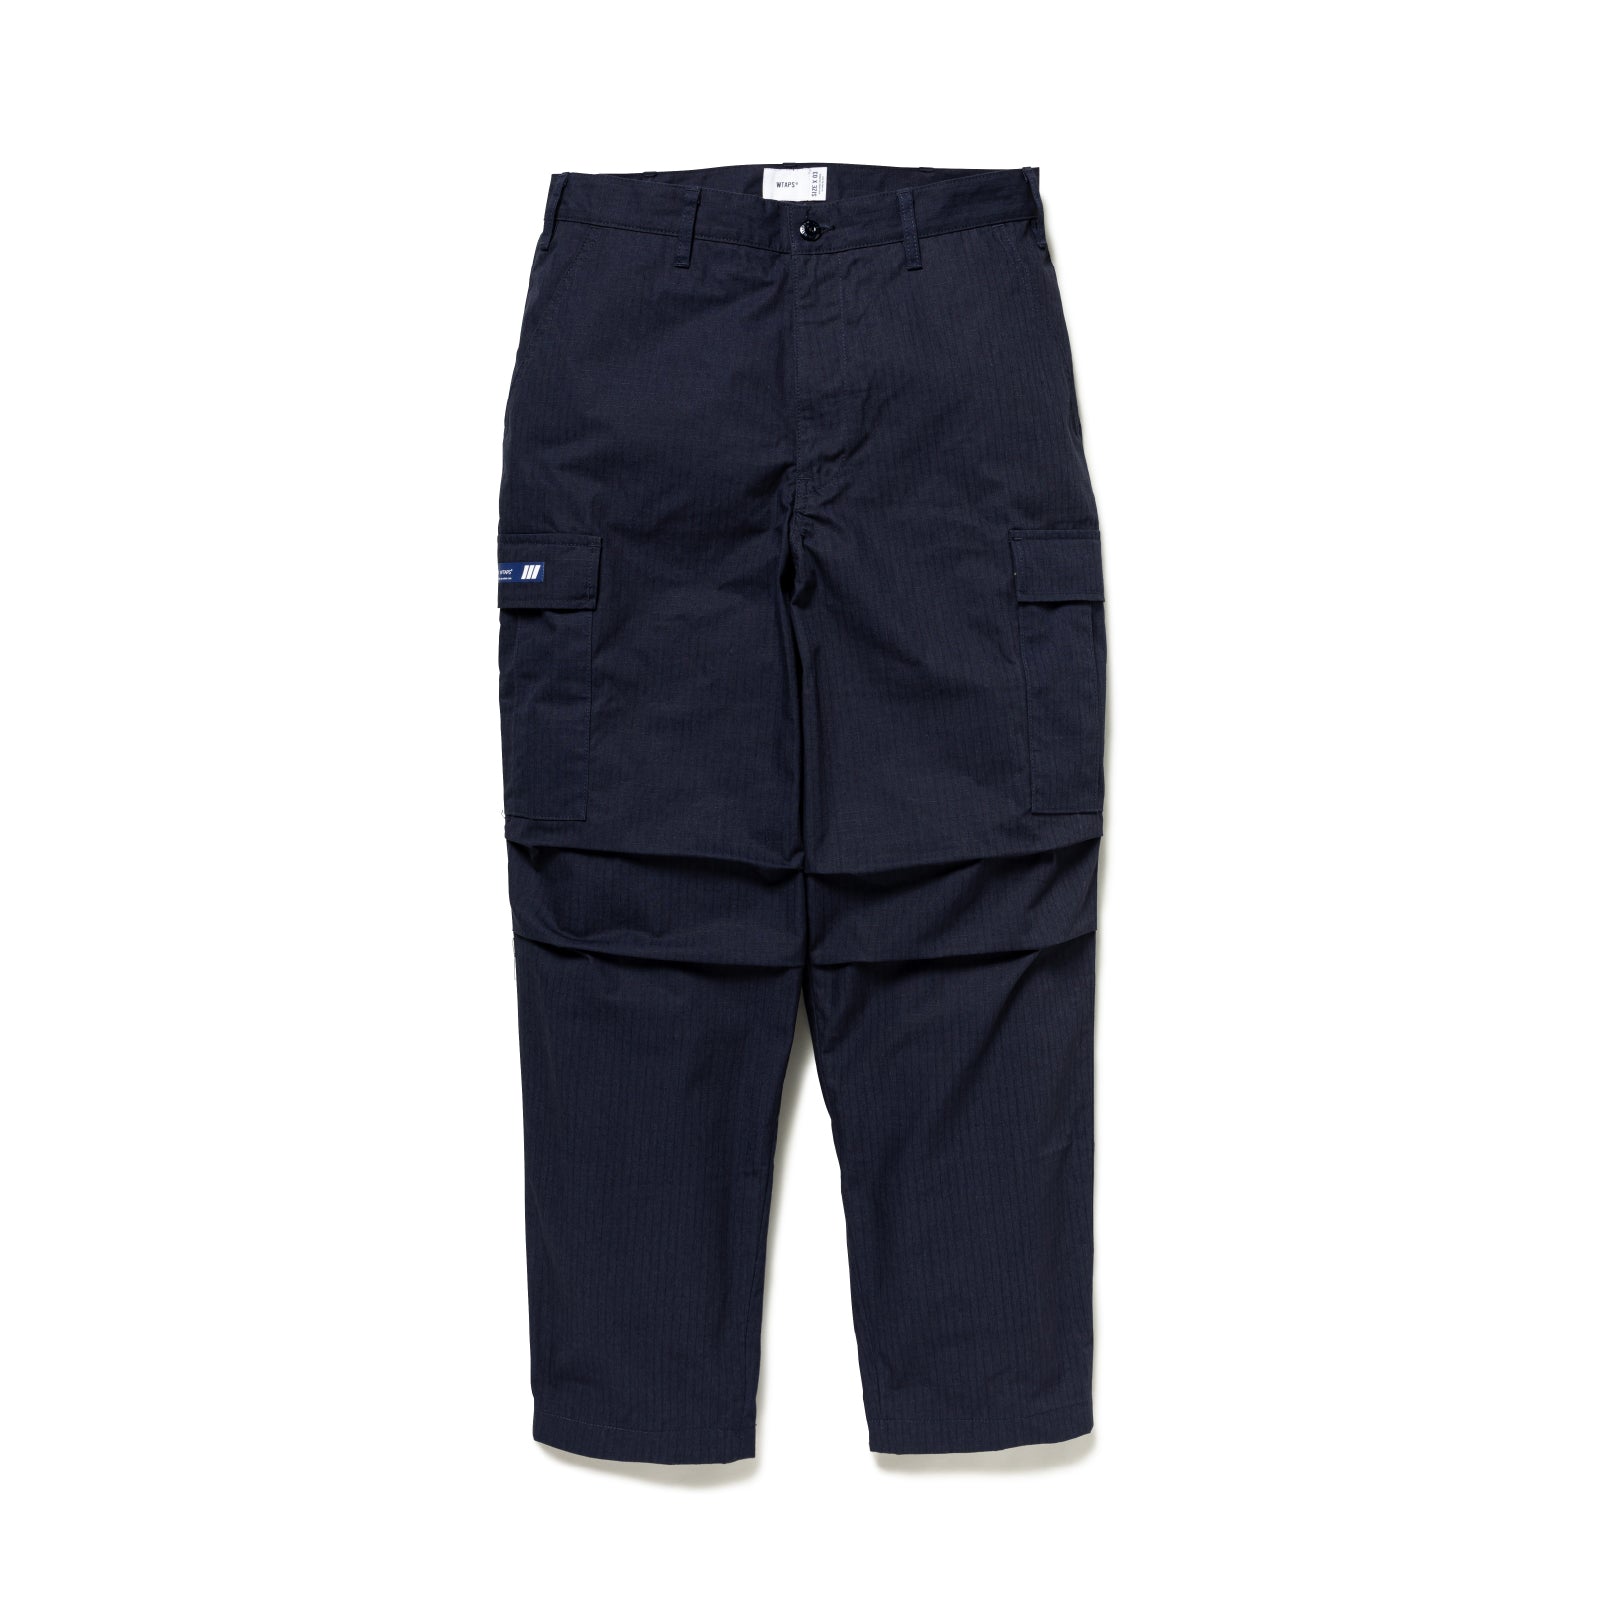 MILT9602 / TROUSERS NYCO. RIPSTOP 定価以下 - パンツ